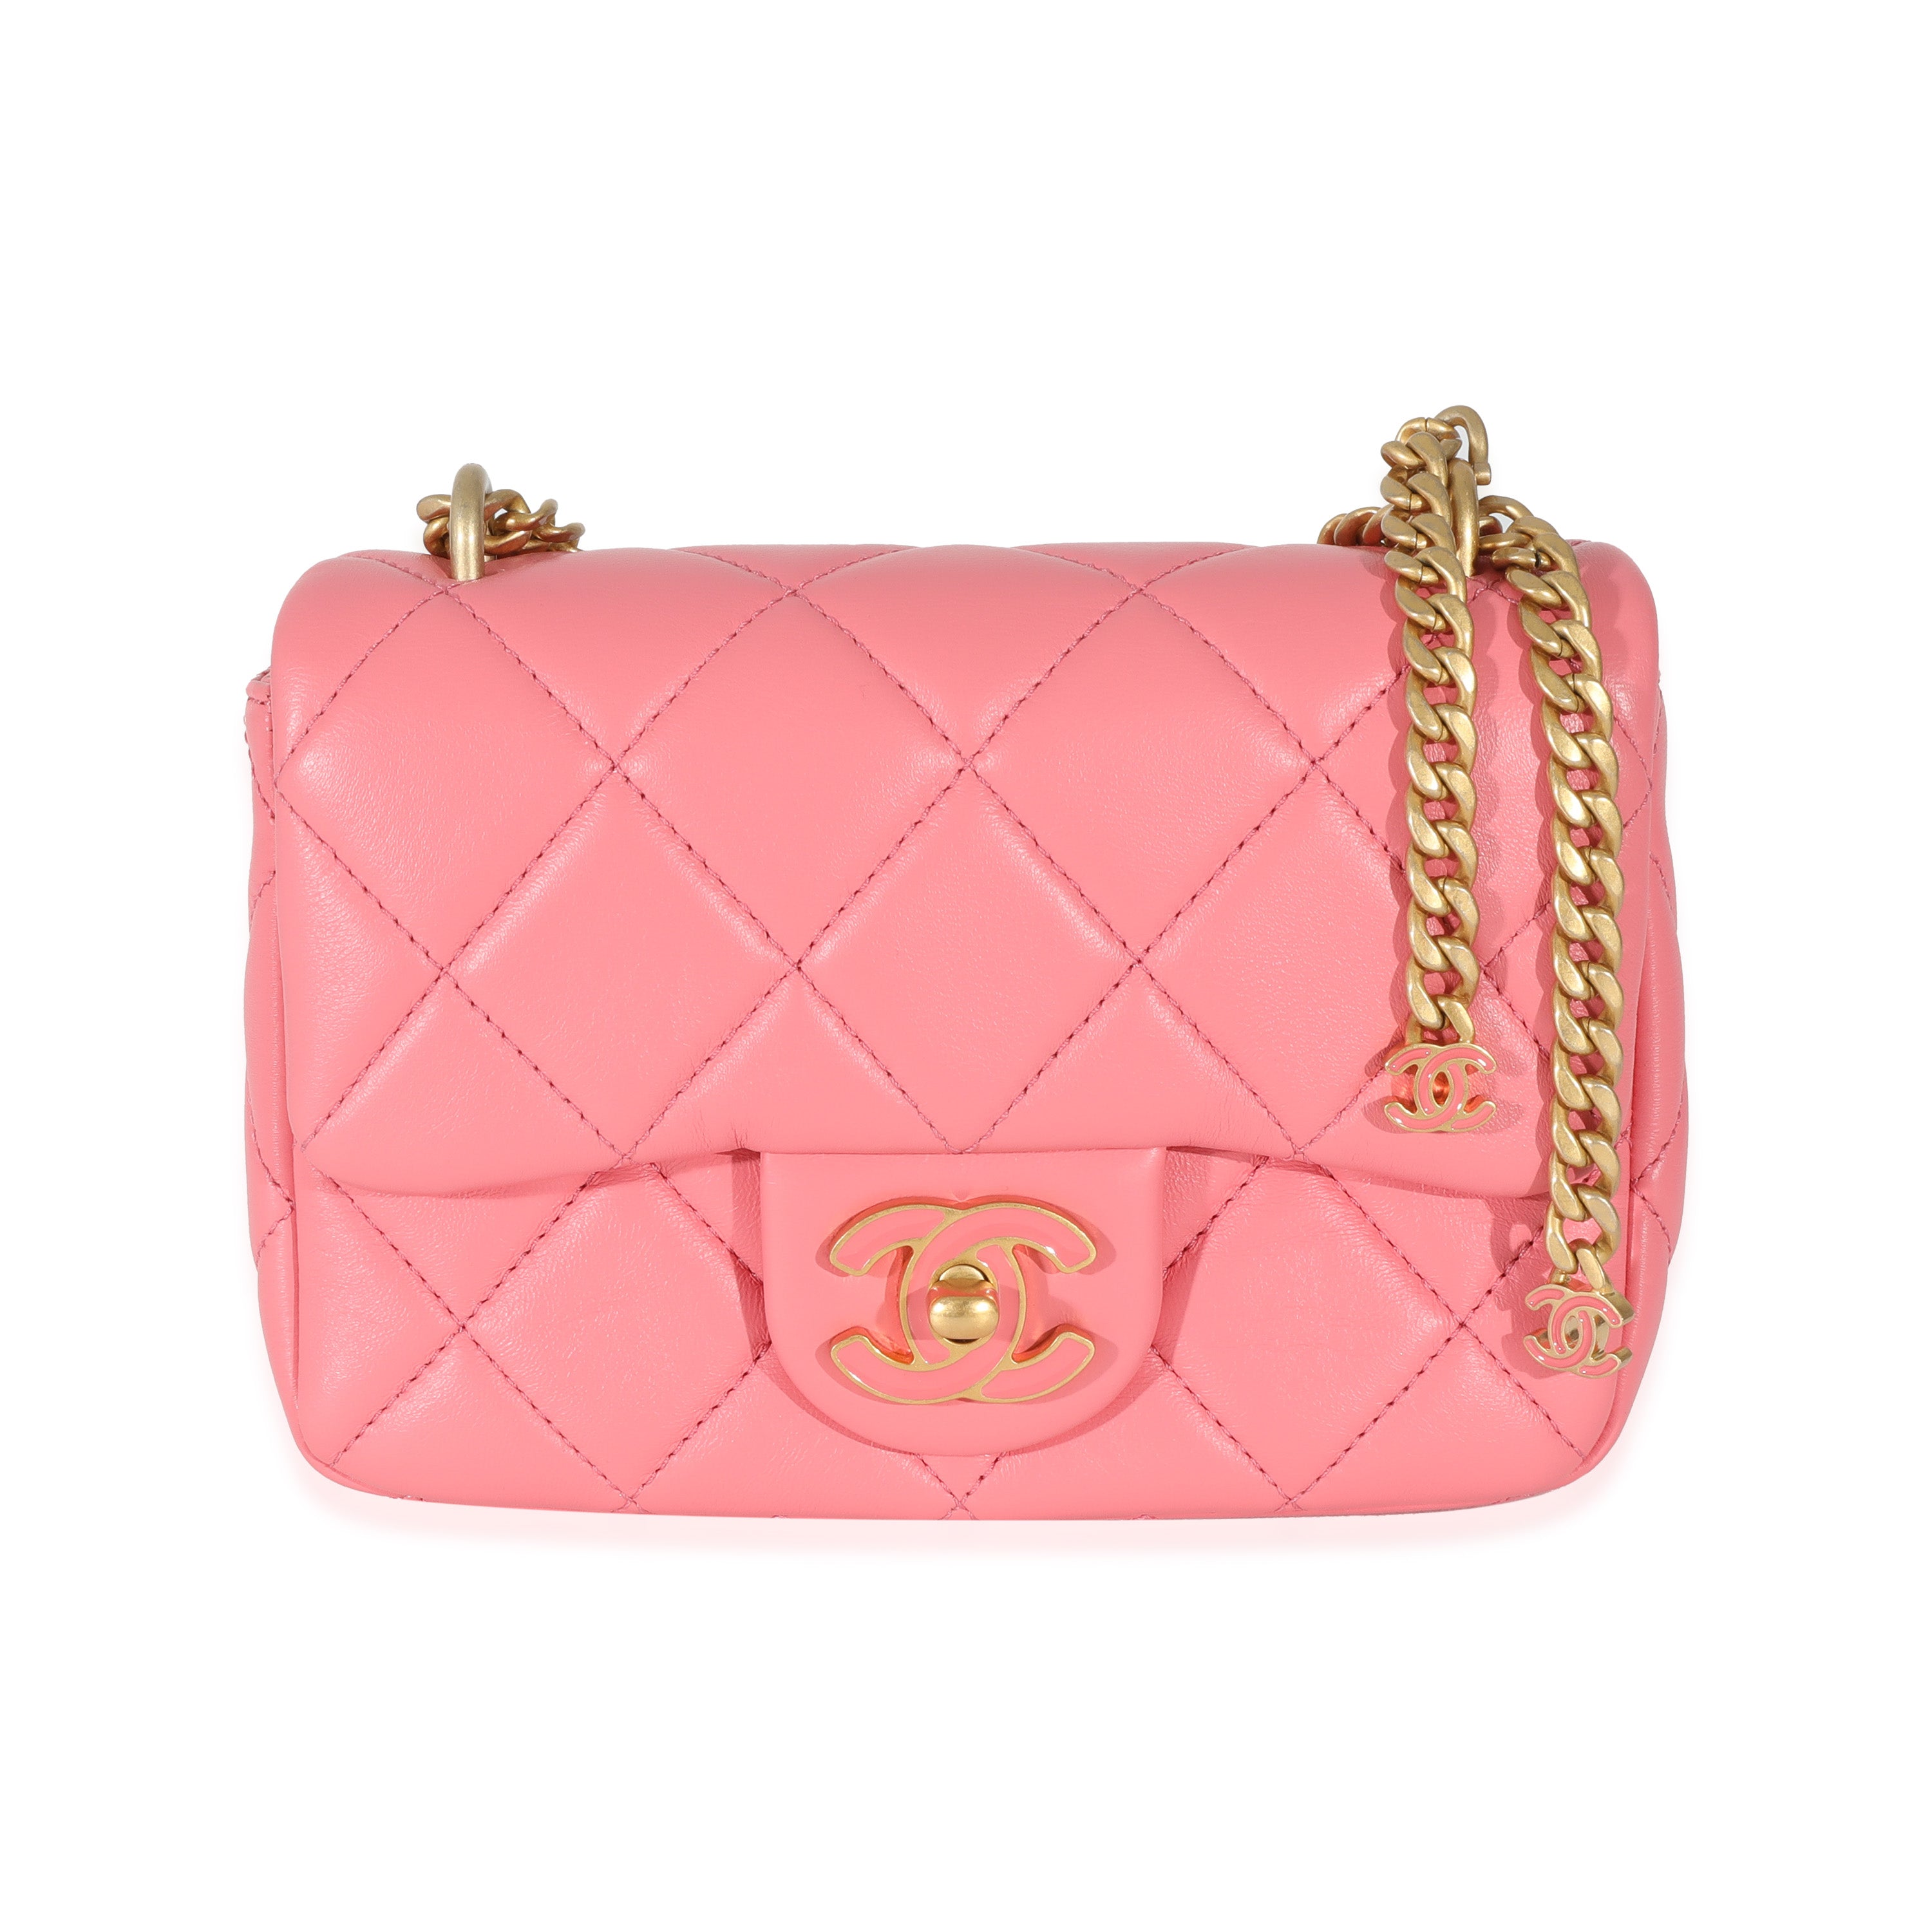 Chanel 22P Mini Square Flap Bag Lambskin Pink With Enamel And Gold Hardware  (Microchip)